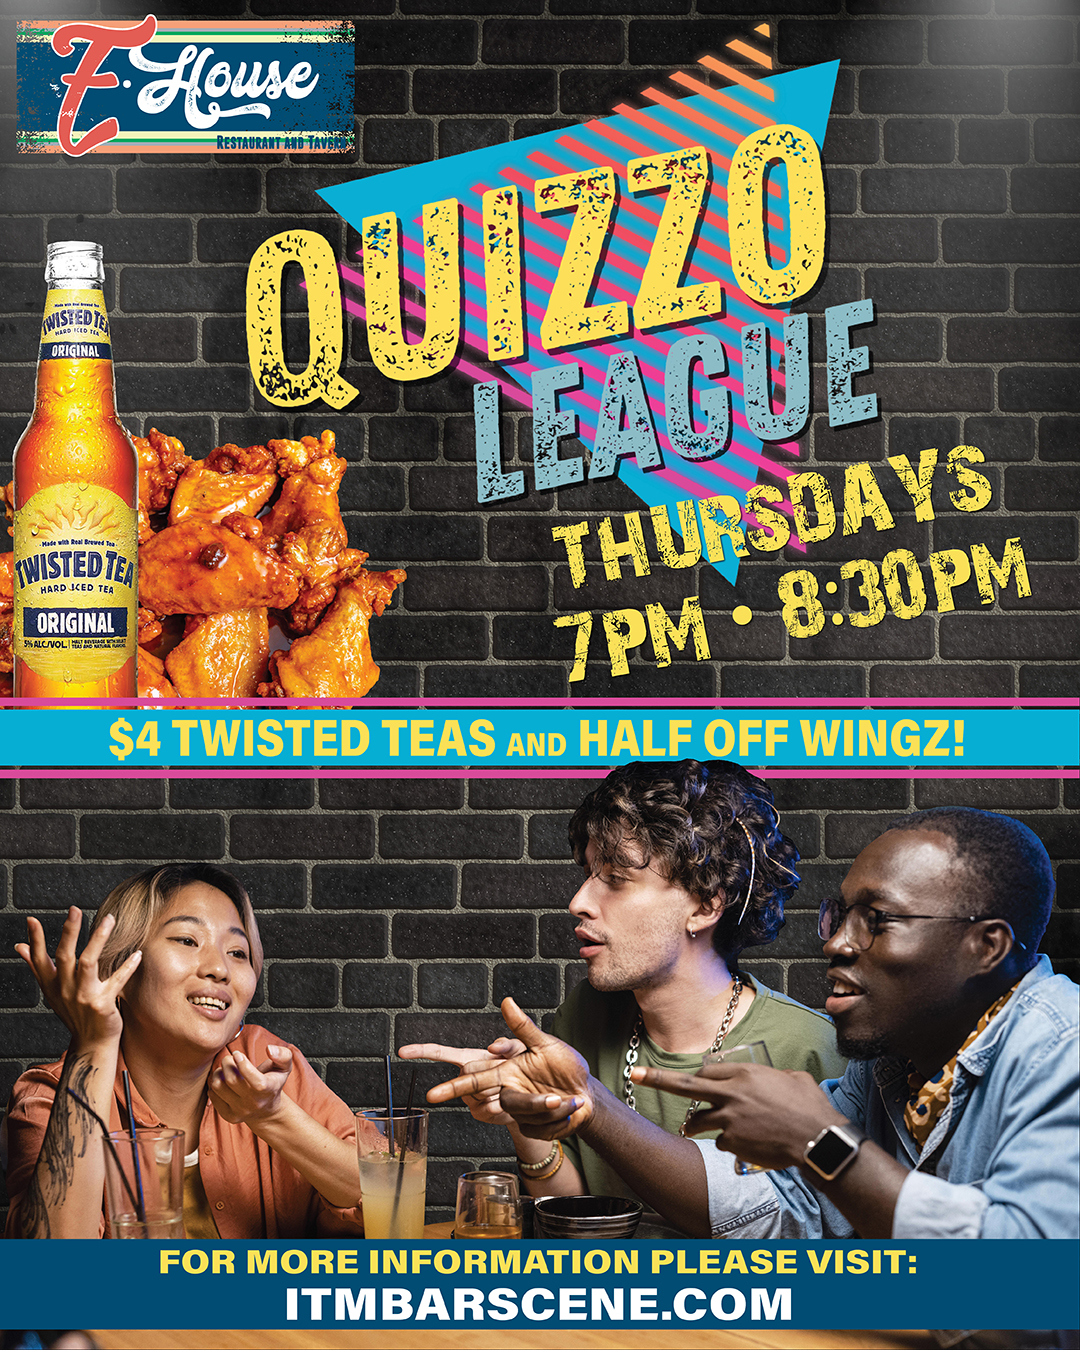 Poster promoting "Quizzo League" at Z-House with $4 Twisted Teas and half off wings on Thursdays from 7 PM to 8:30 PM. The poster features images of people, Twisted Tea, and chicken wings.